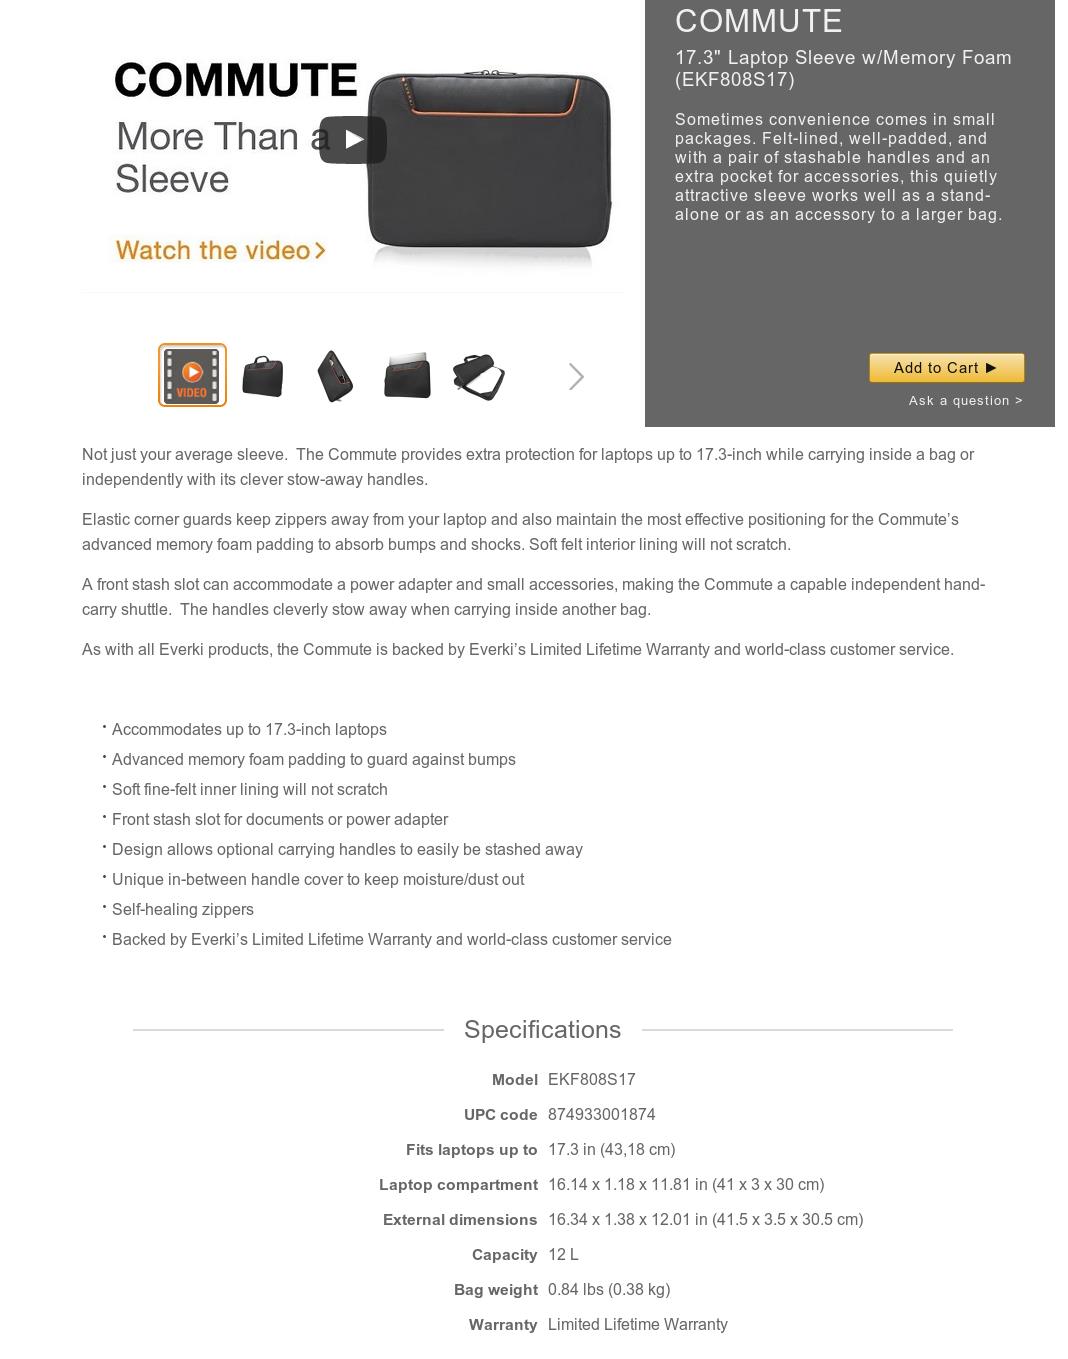 A large marketing image providing additional information about the product Everki 17" Commute Sleeve Notebook Bag - Additional alt info not provided